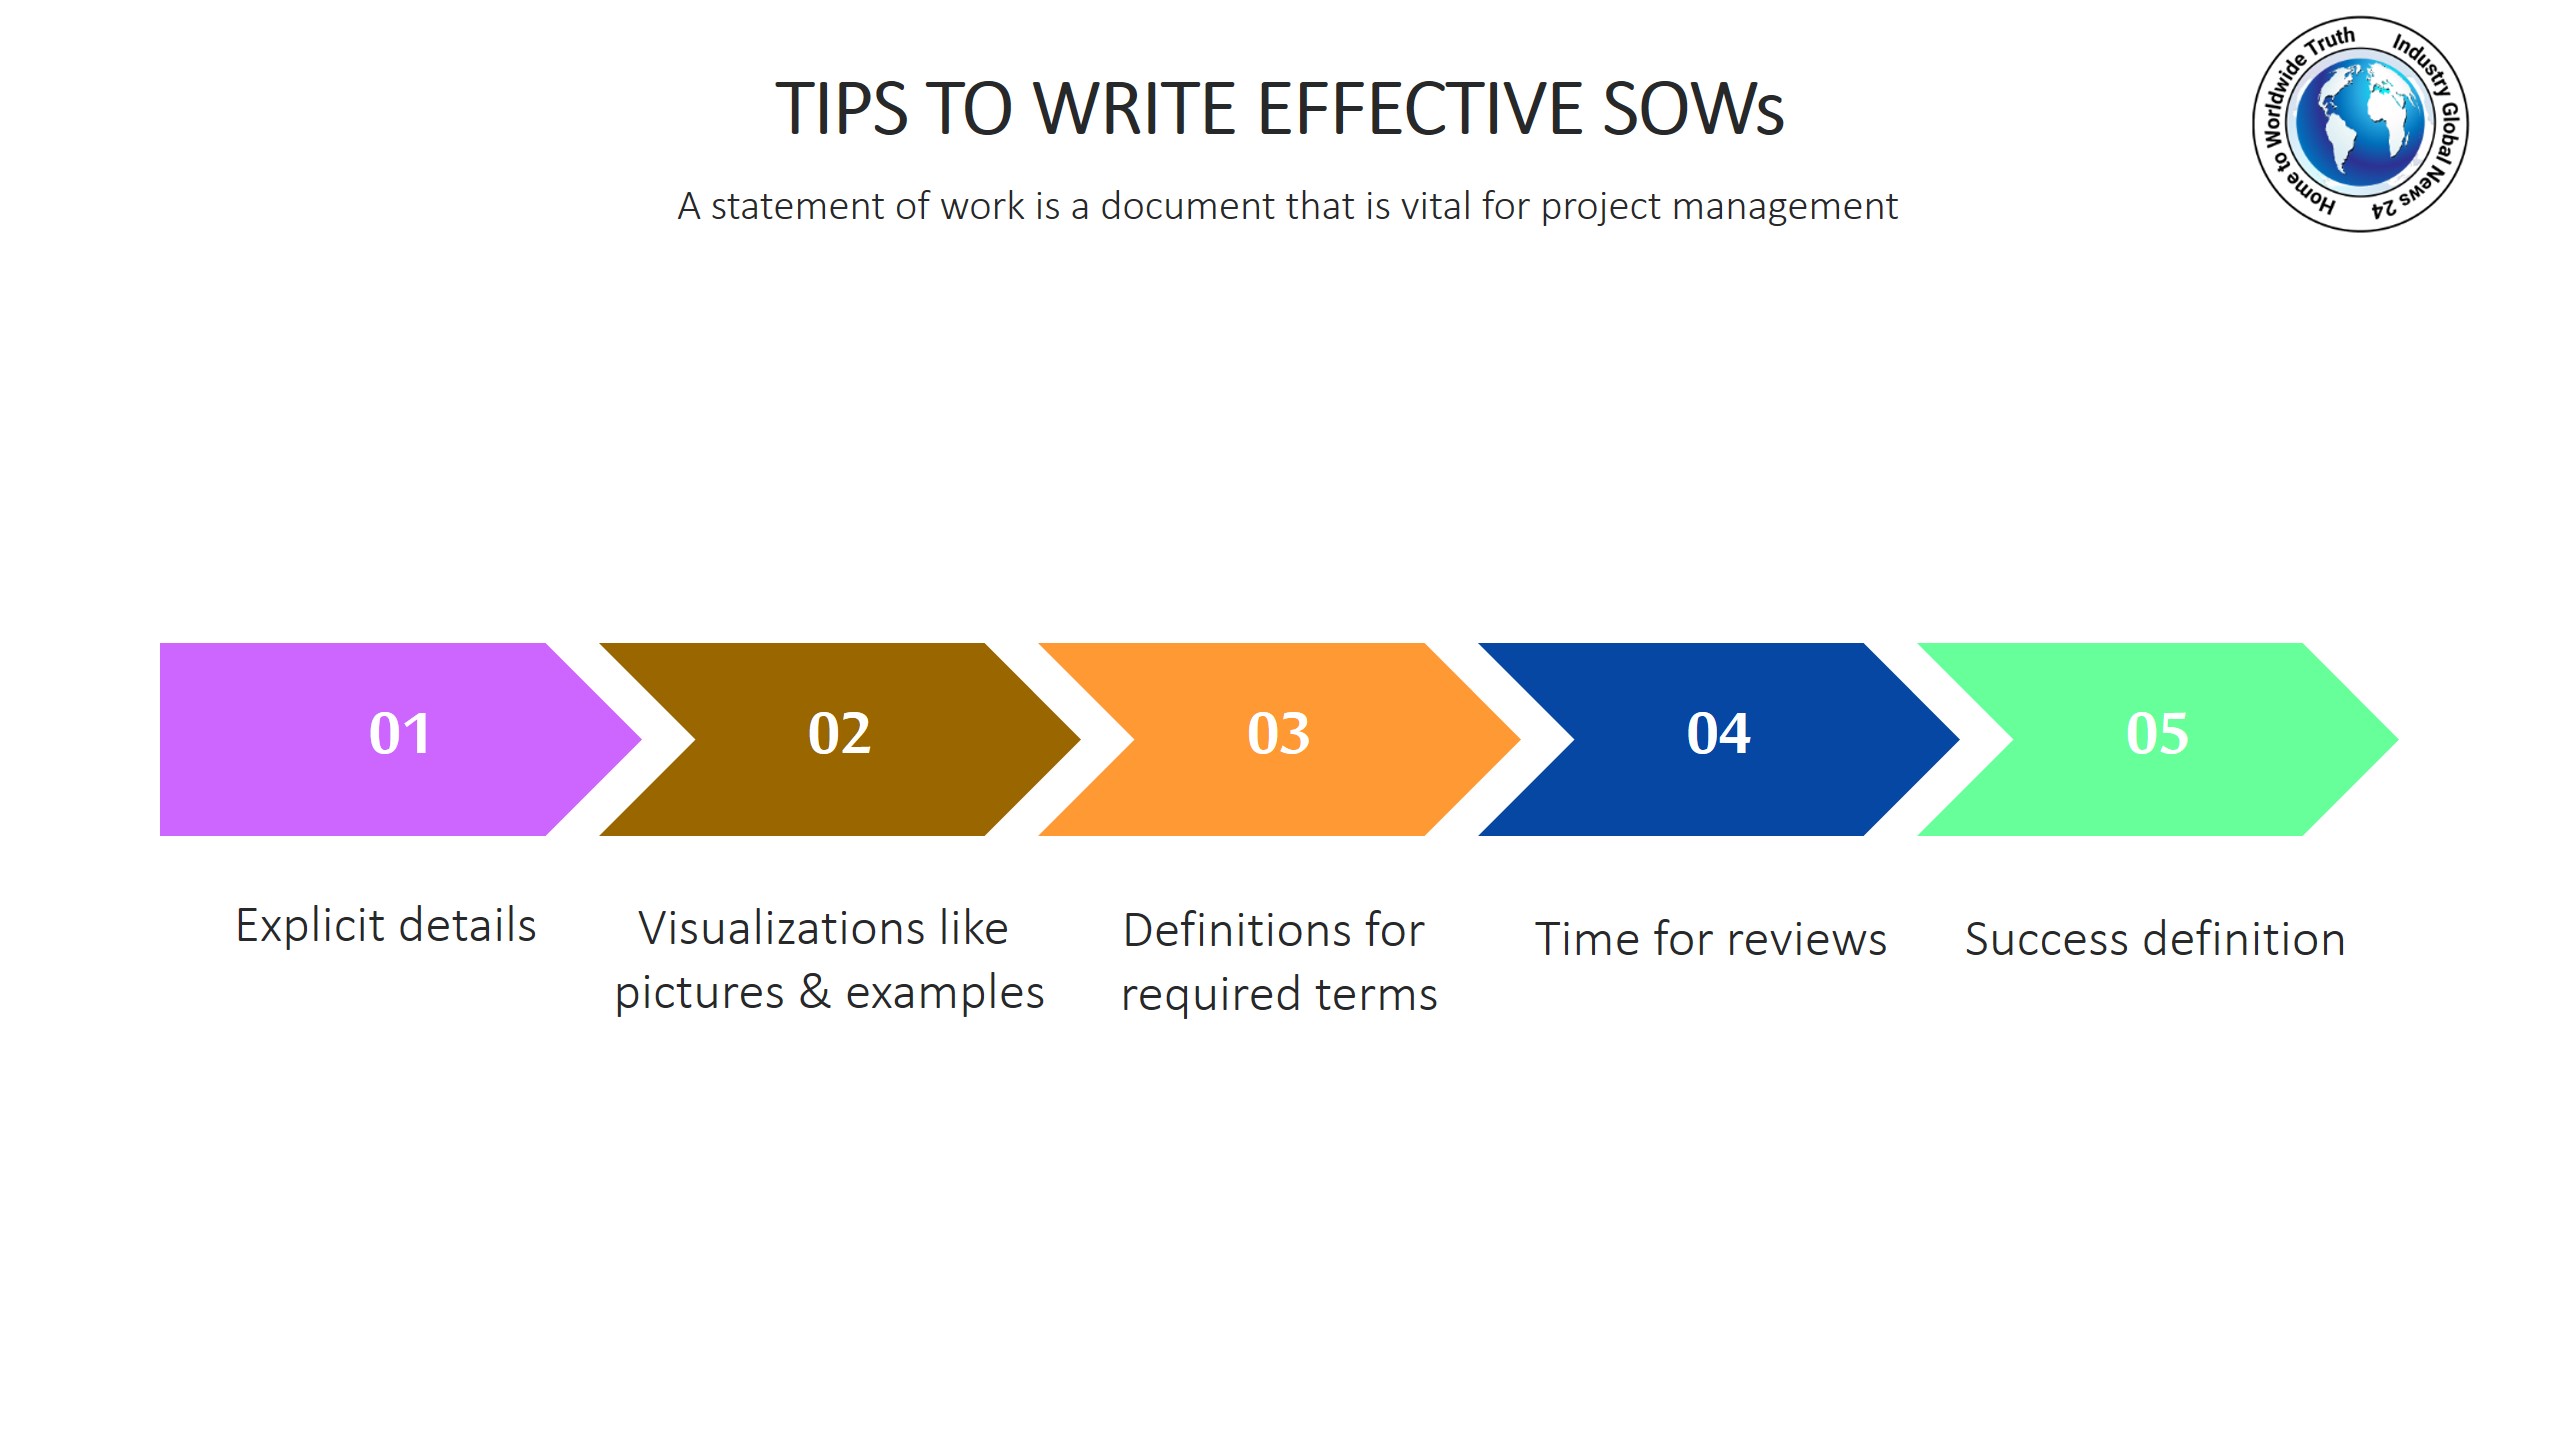 Tips to write effective SOWs